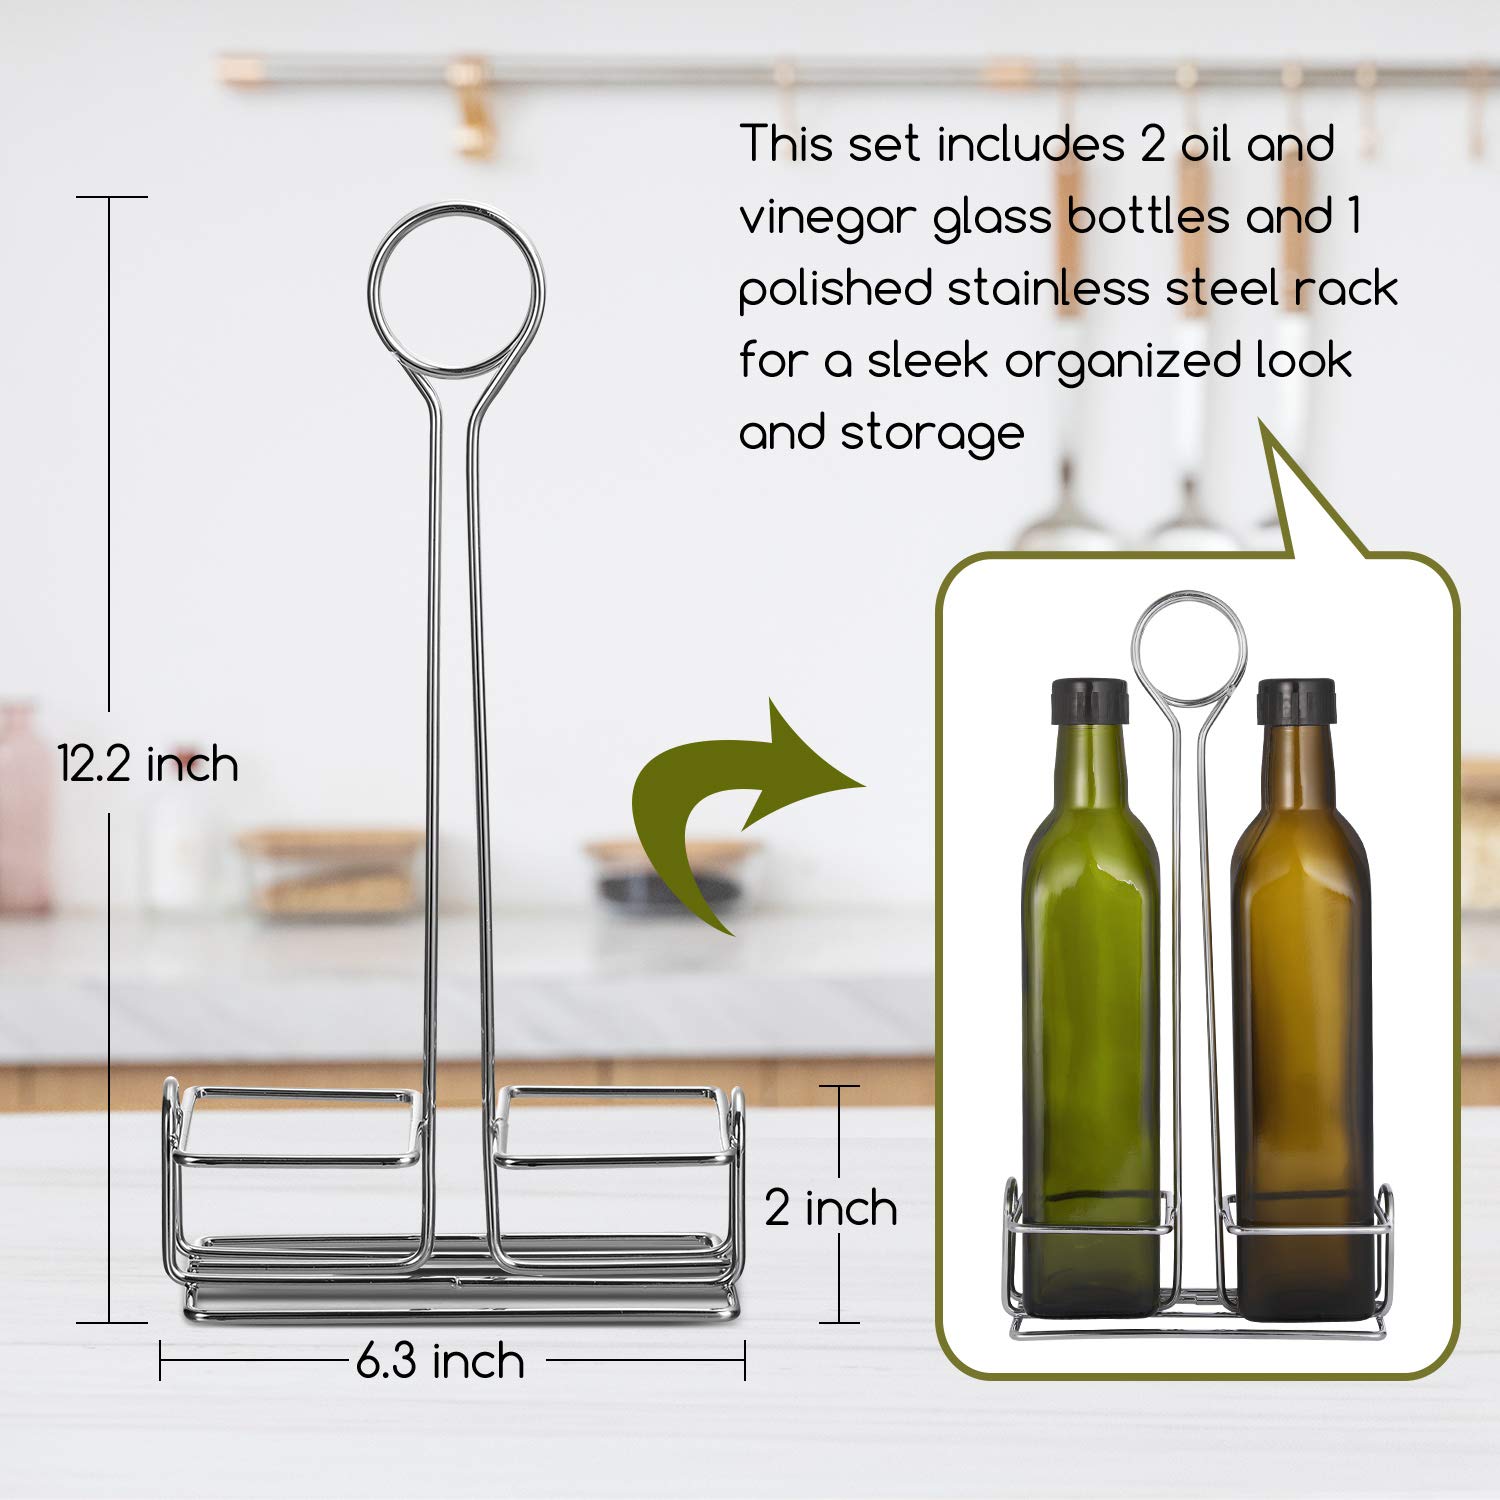 AOZITA 17oz Olive Oil Dispenser Bottle Set with Stainless Steel Holder Rack - 500ml Glass Oil & Vinegar Cruet with No-drip Pourers, Funnel, and Labels - Dark Green & Brown